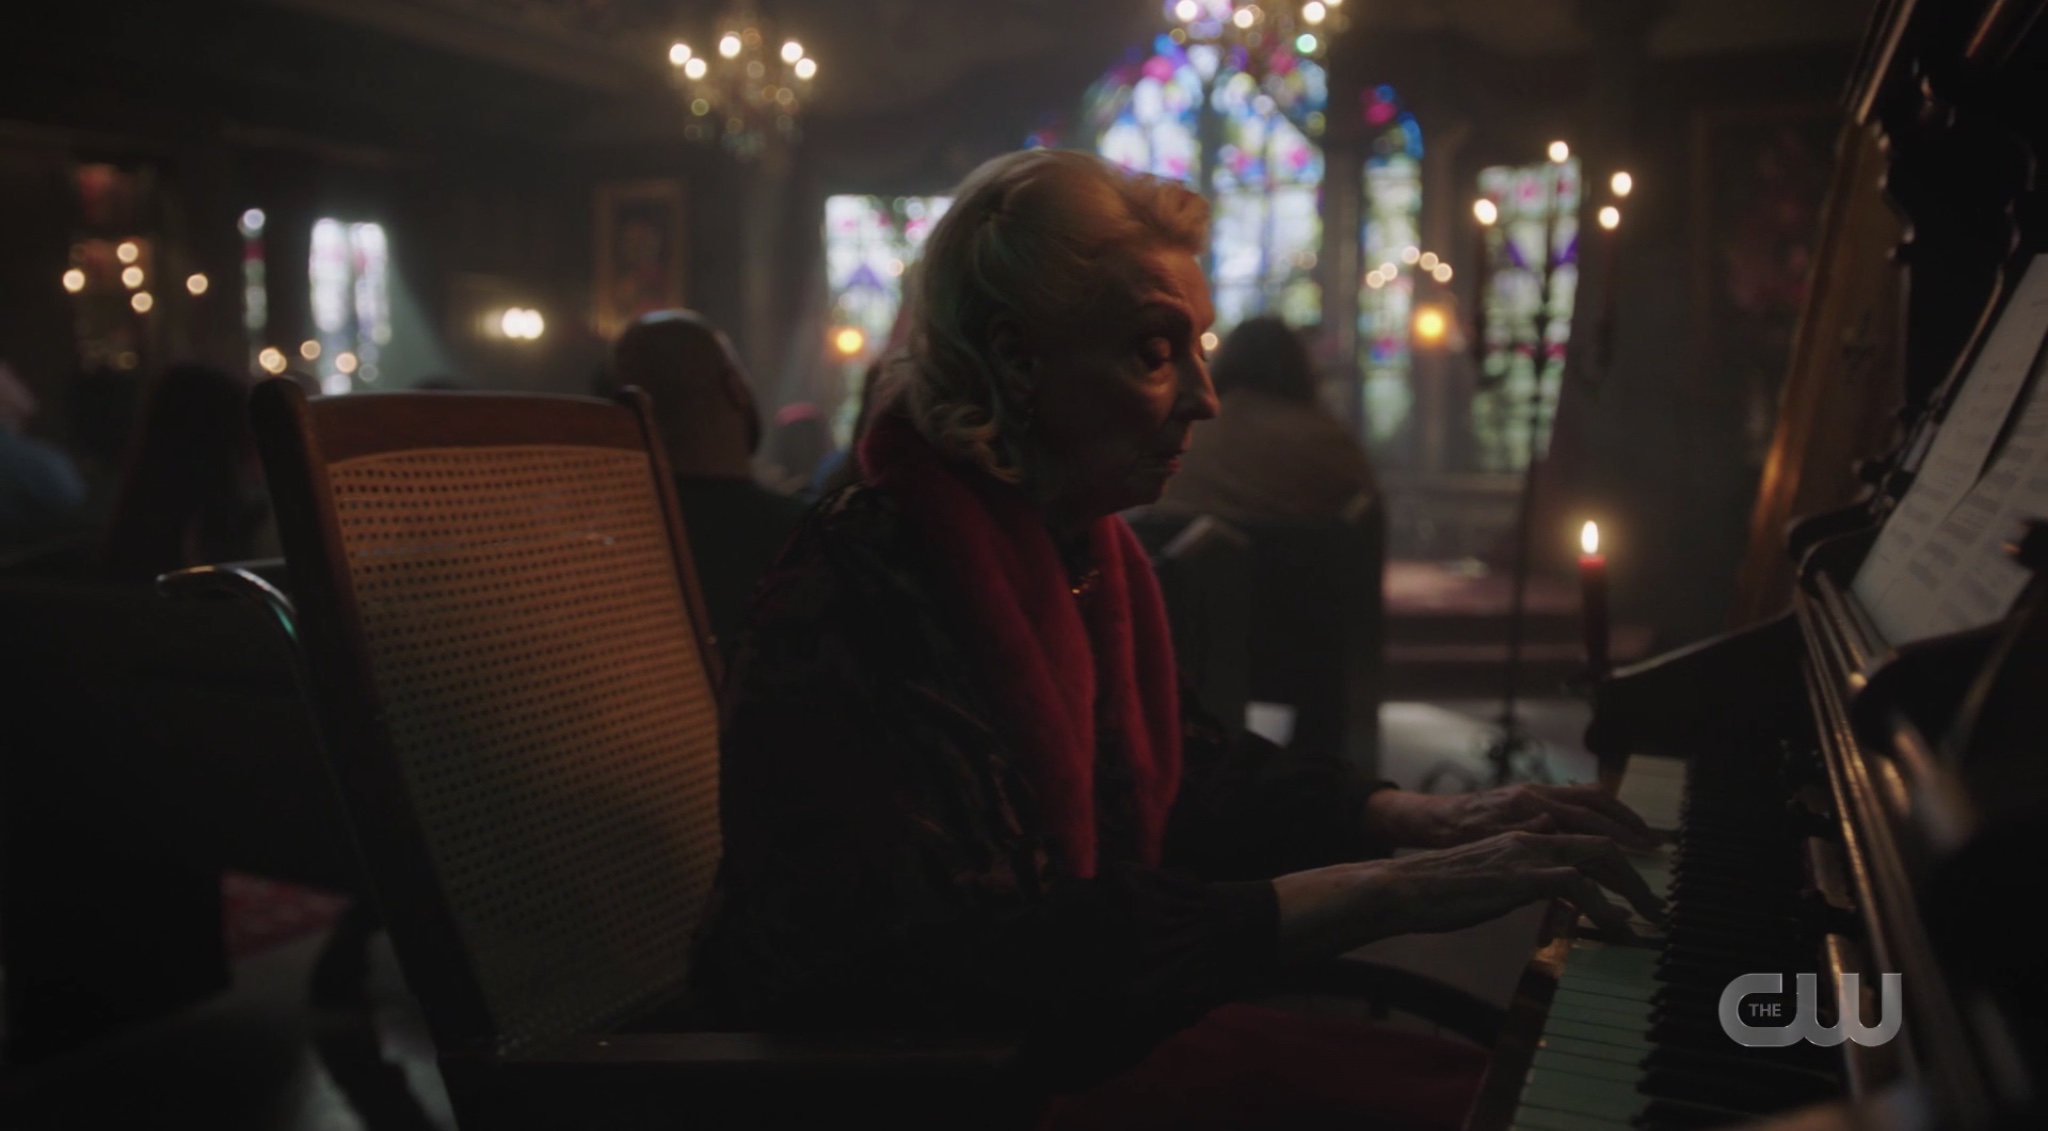 Nana Rose joined the Blossom Church as organist on Riverdale